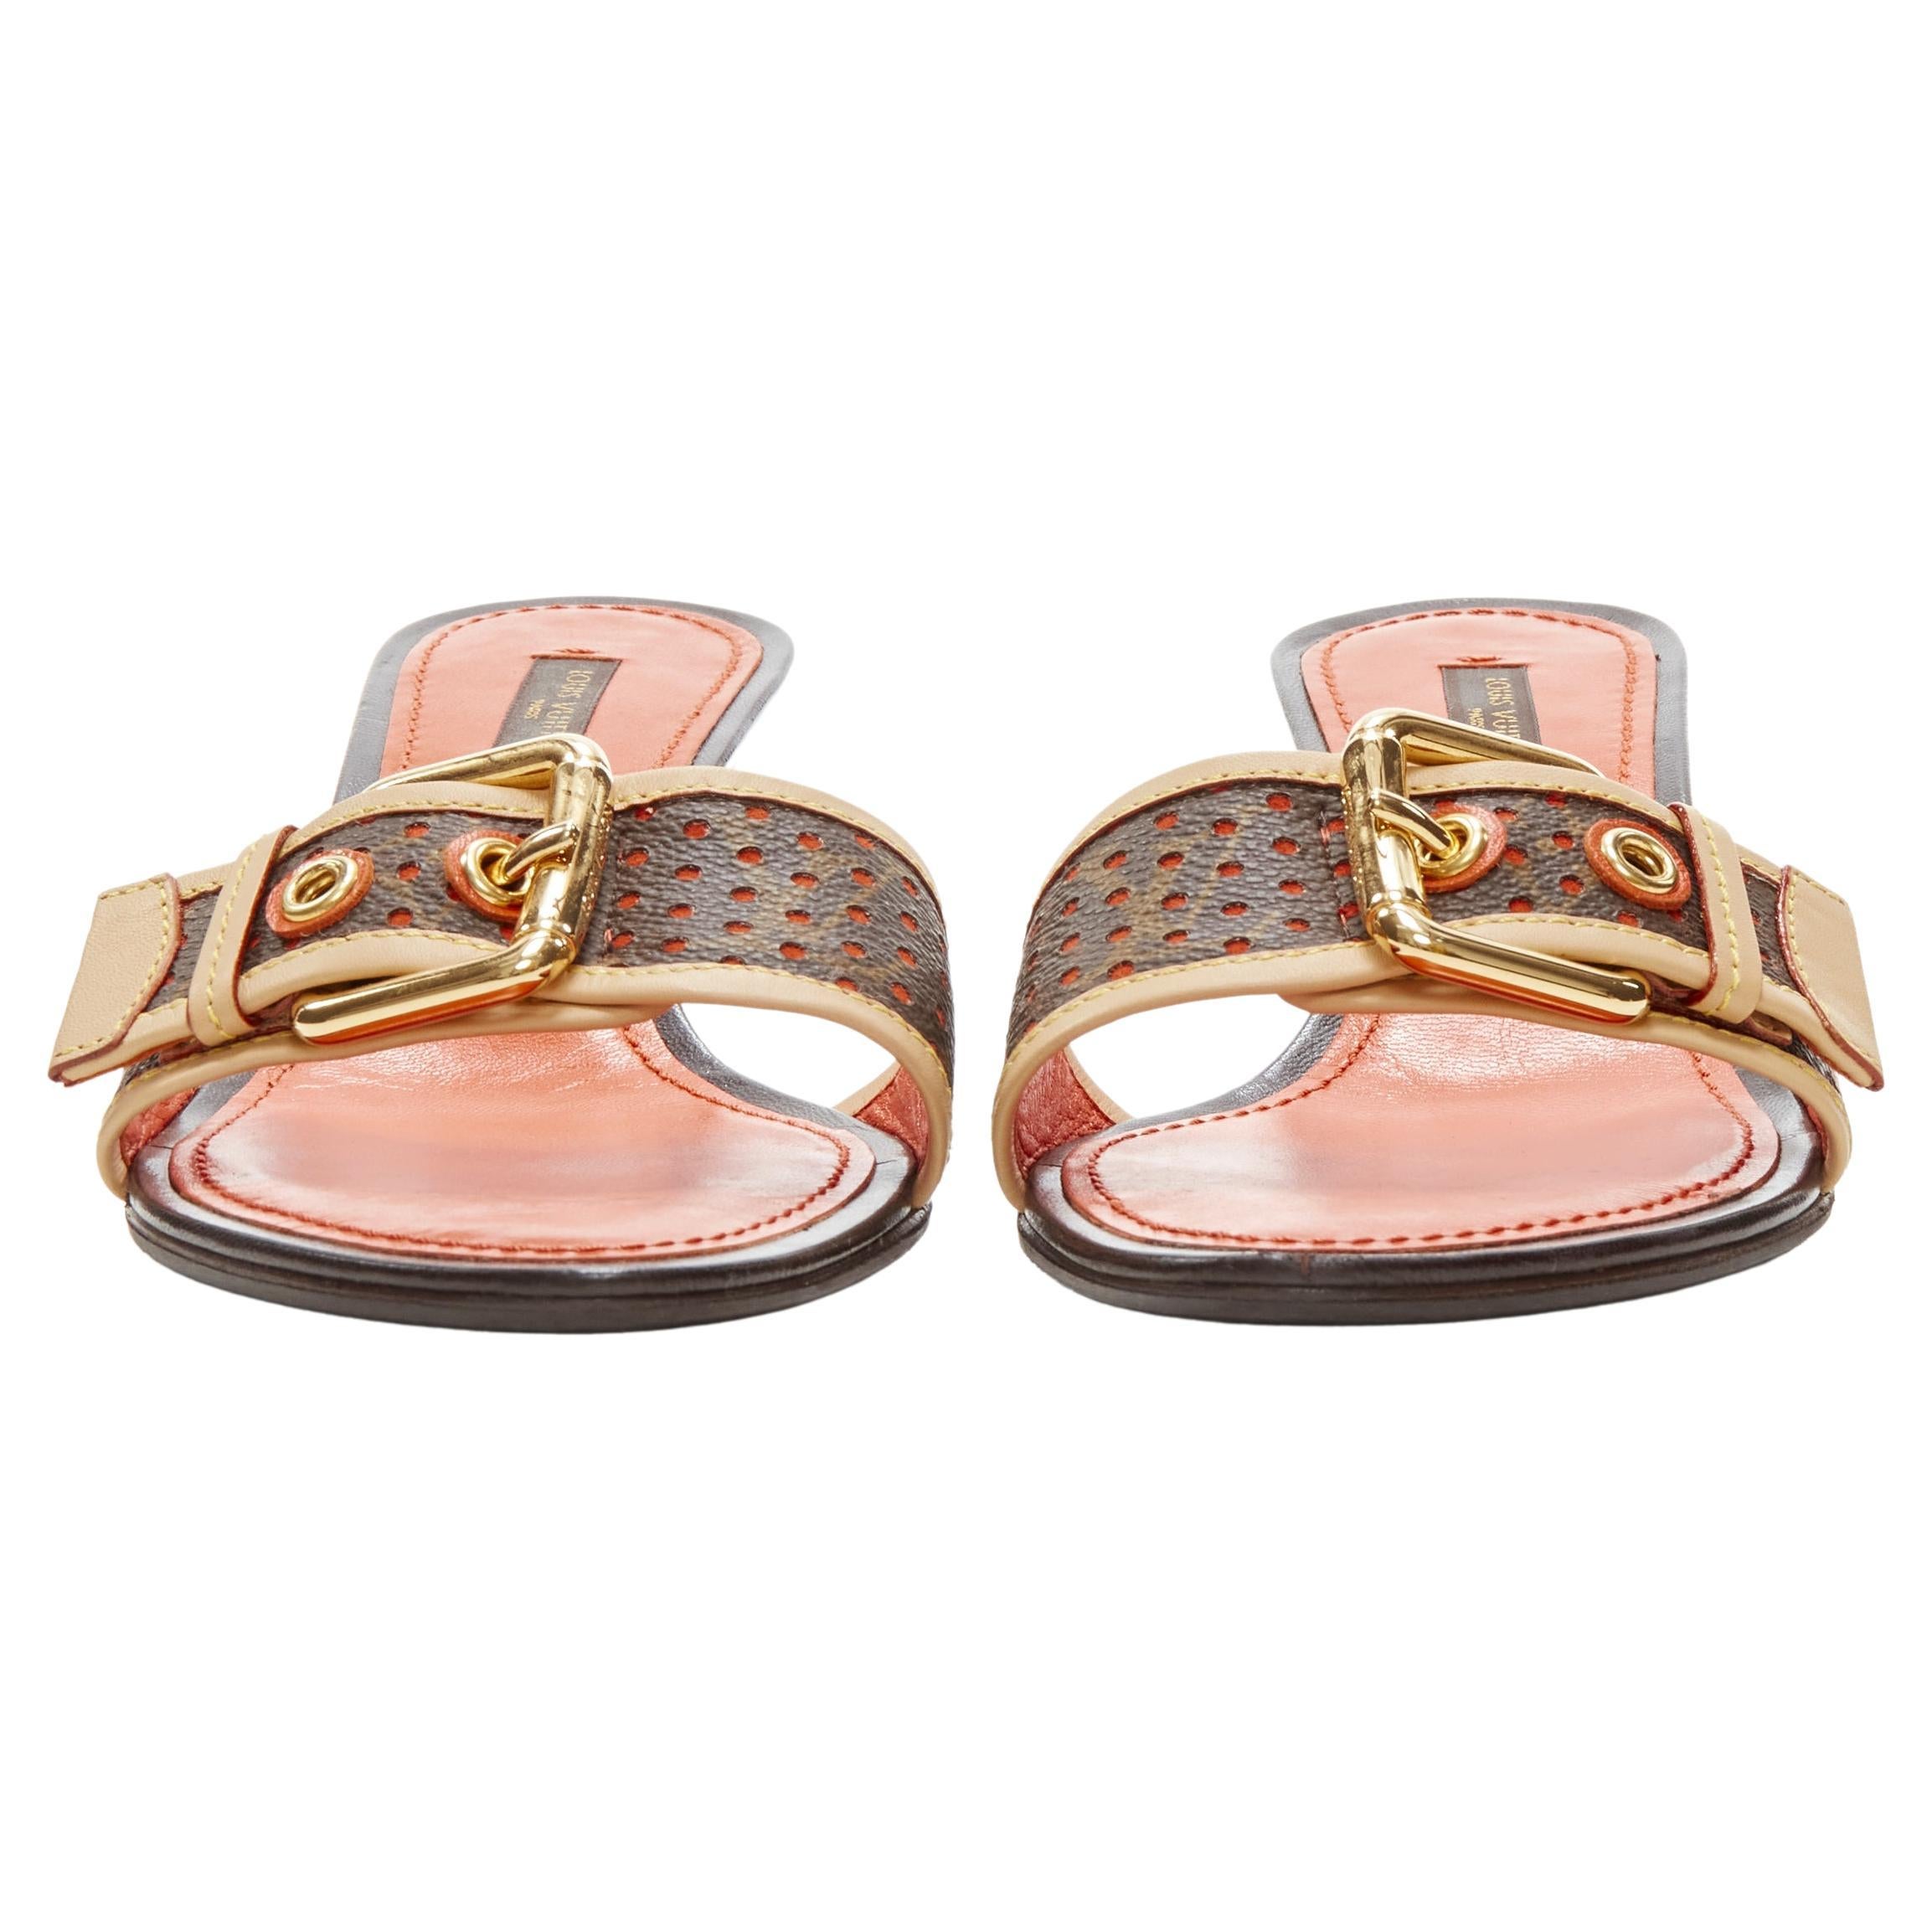 LOUIS VUITTON Y2K orange perforated LV monogram gold buckle heel sandal EU36.5
Brand: Louis Vuitton
Material: Leather
Color: Brown
Pattern: Monogram
Extra Detail: Gold-tone buckle.
Made in: Italy

CONDITION:
Condition: Excellent, this item was